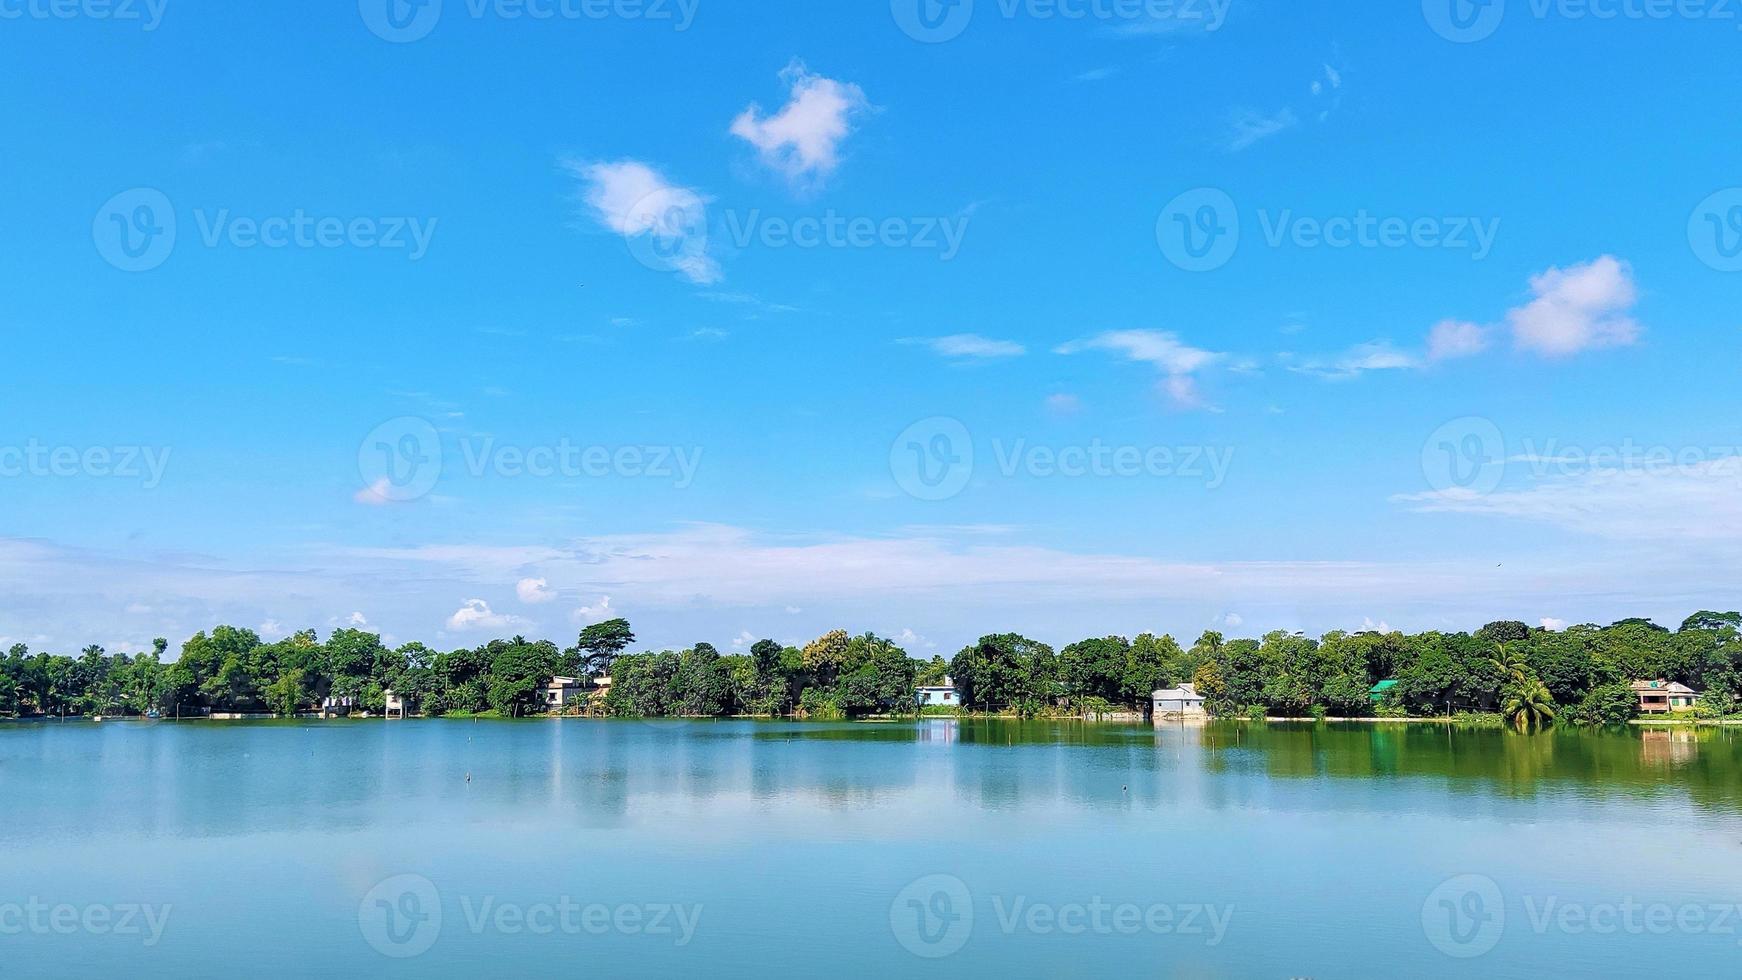 Beautiful shot of a lake surrounded by greenery under a cloudy sky photo